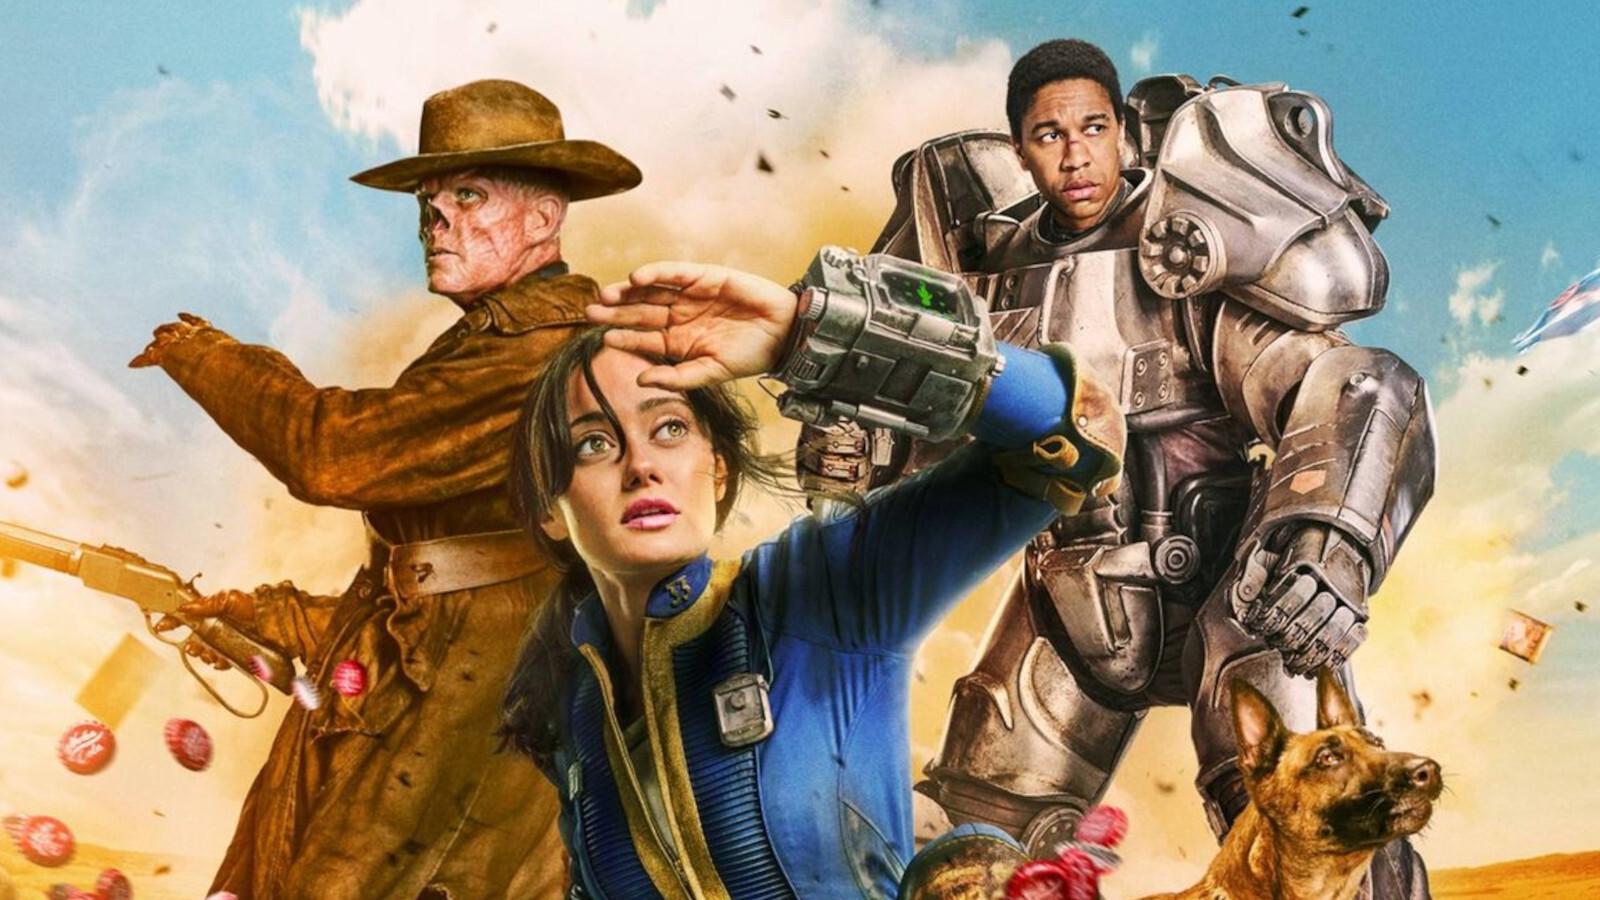 The cast of Amazon Prime Video's Fallout